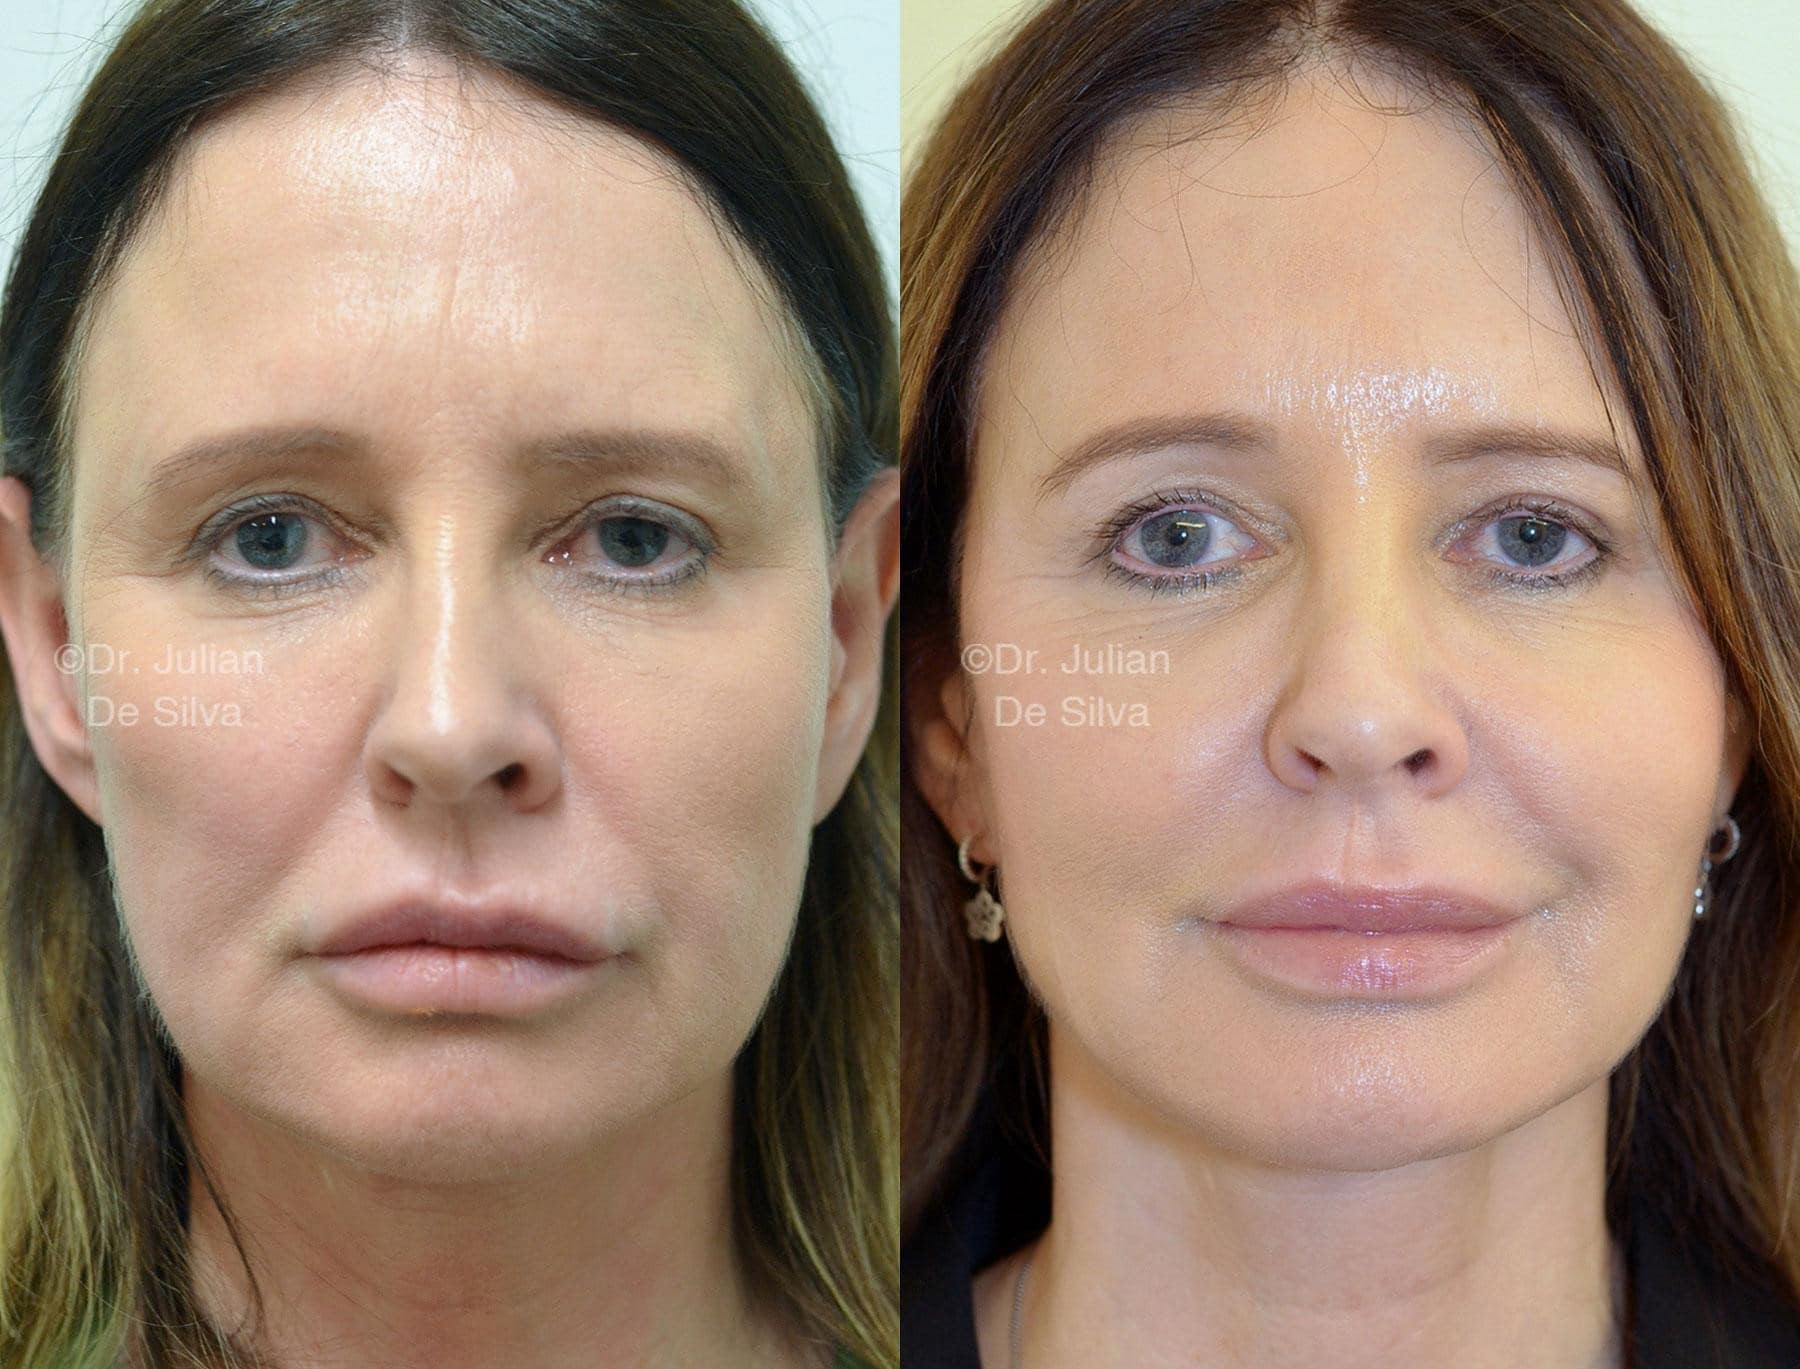 Female face, before and after Mini Facelift treatment, front view, patient 1